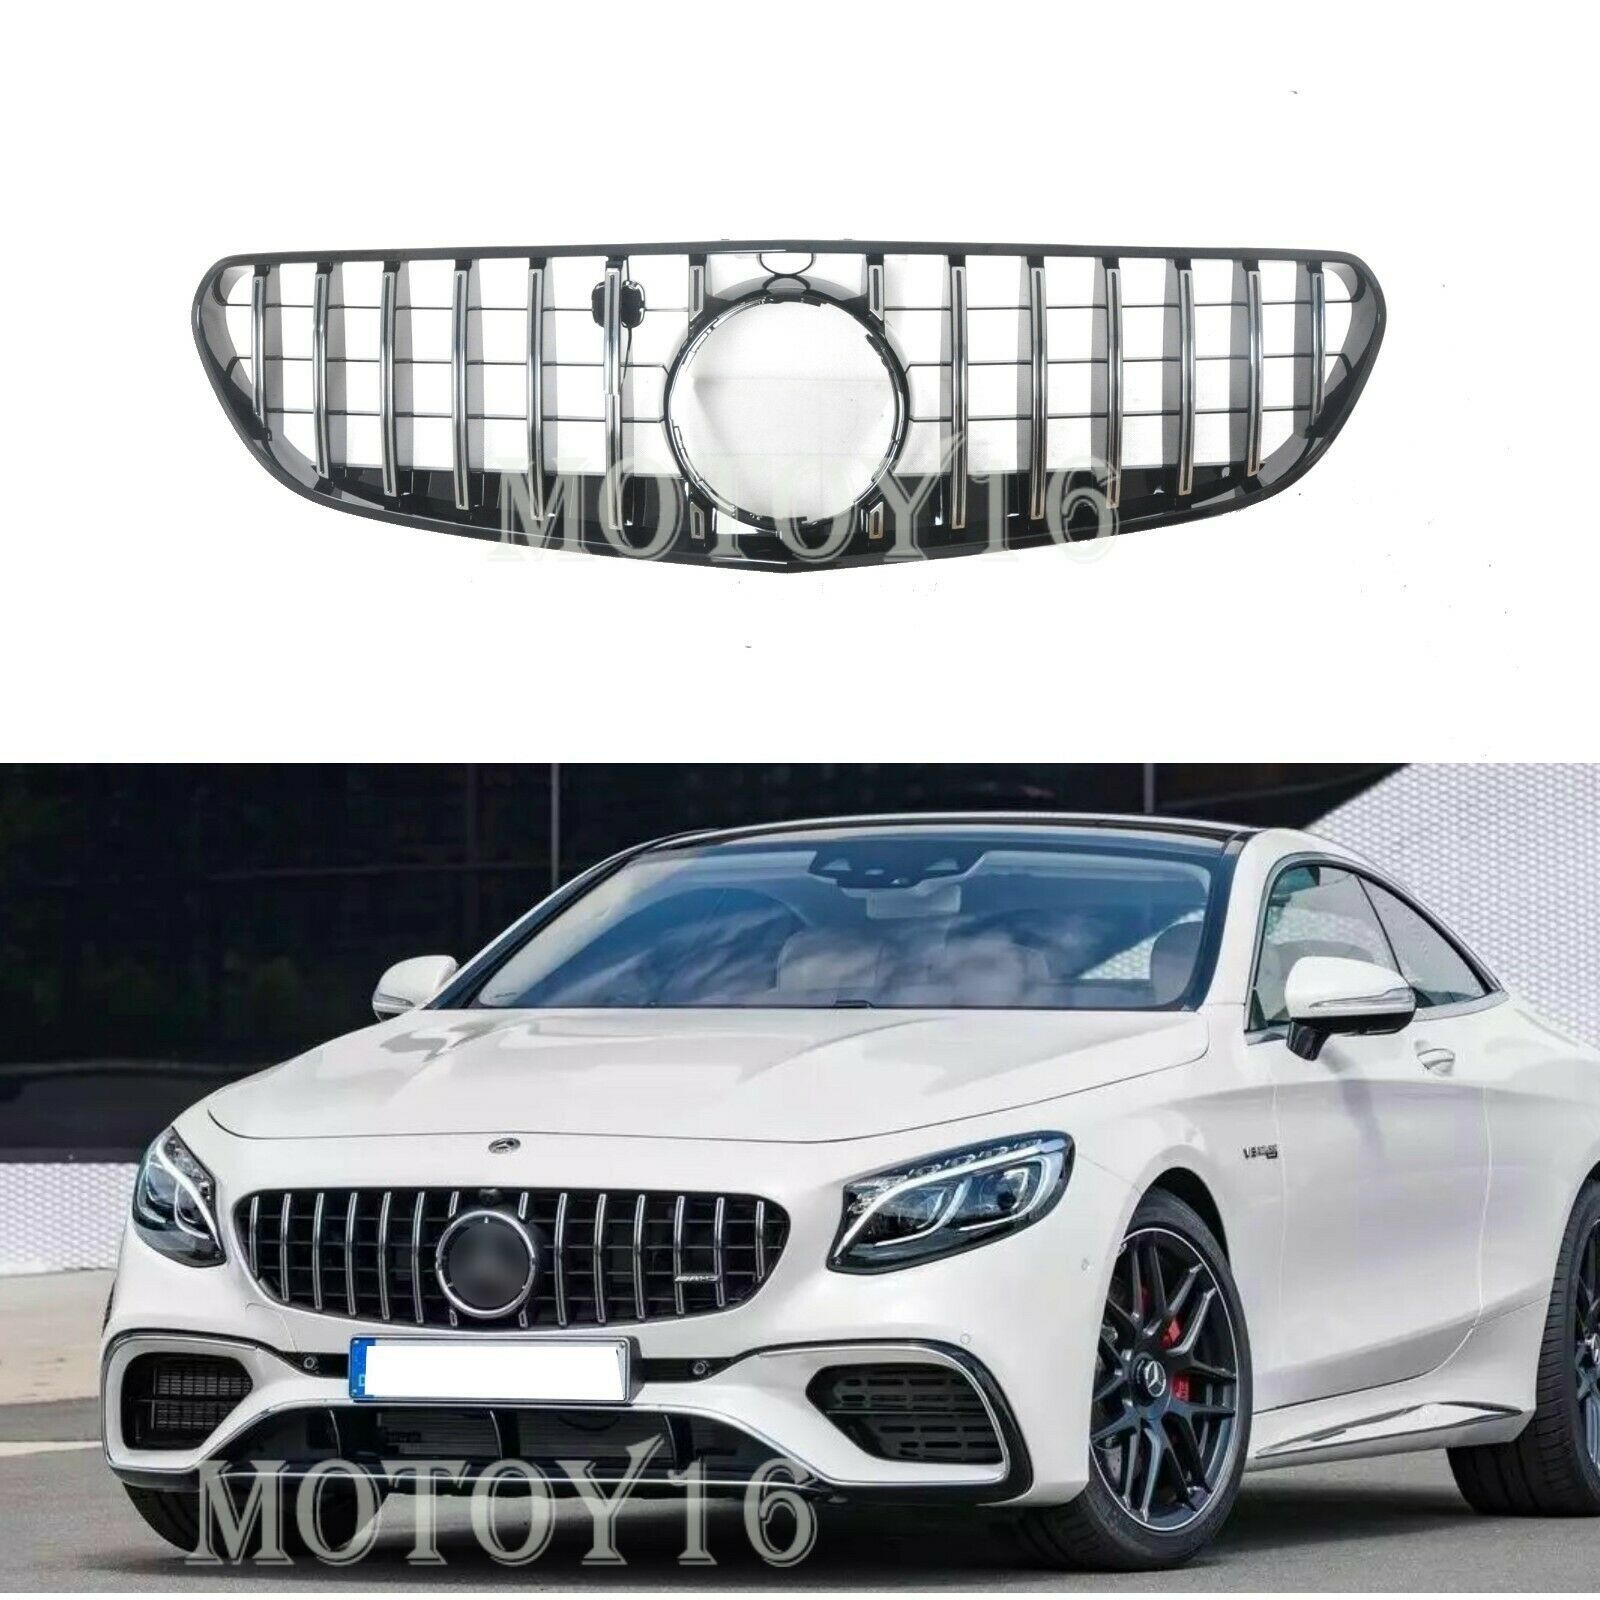 GT Style Panamericana Grill for Mercedes S Class C217 W217 2Door Coupe 2015-17 - $364.08